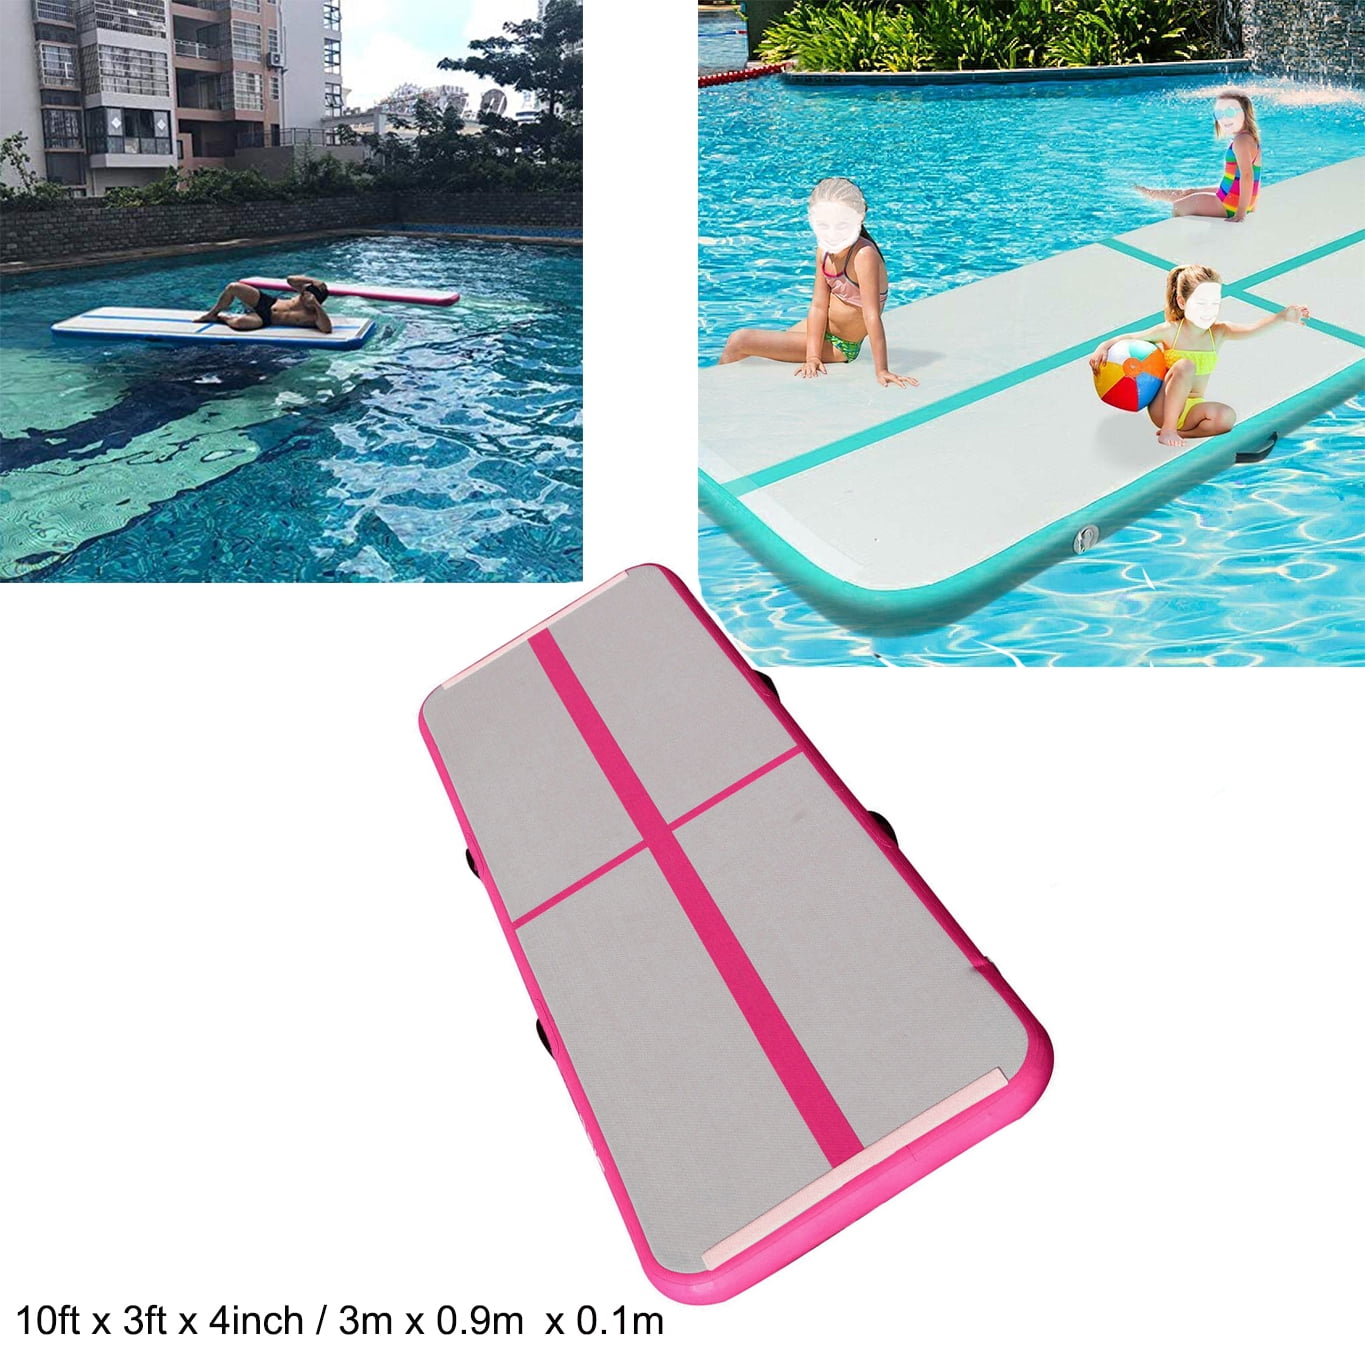 Pink, 4 Metres Lucear Inflatable Gymnastic Mat Air Track Tumbling Mat with Pump Air Floor Practice Gymnastics Cheerleading Tumbling Martial Arts for Home Use Beach Park and Water 